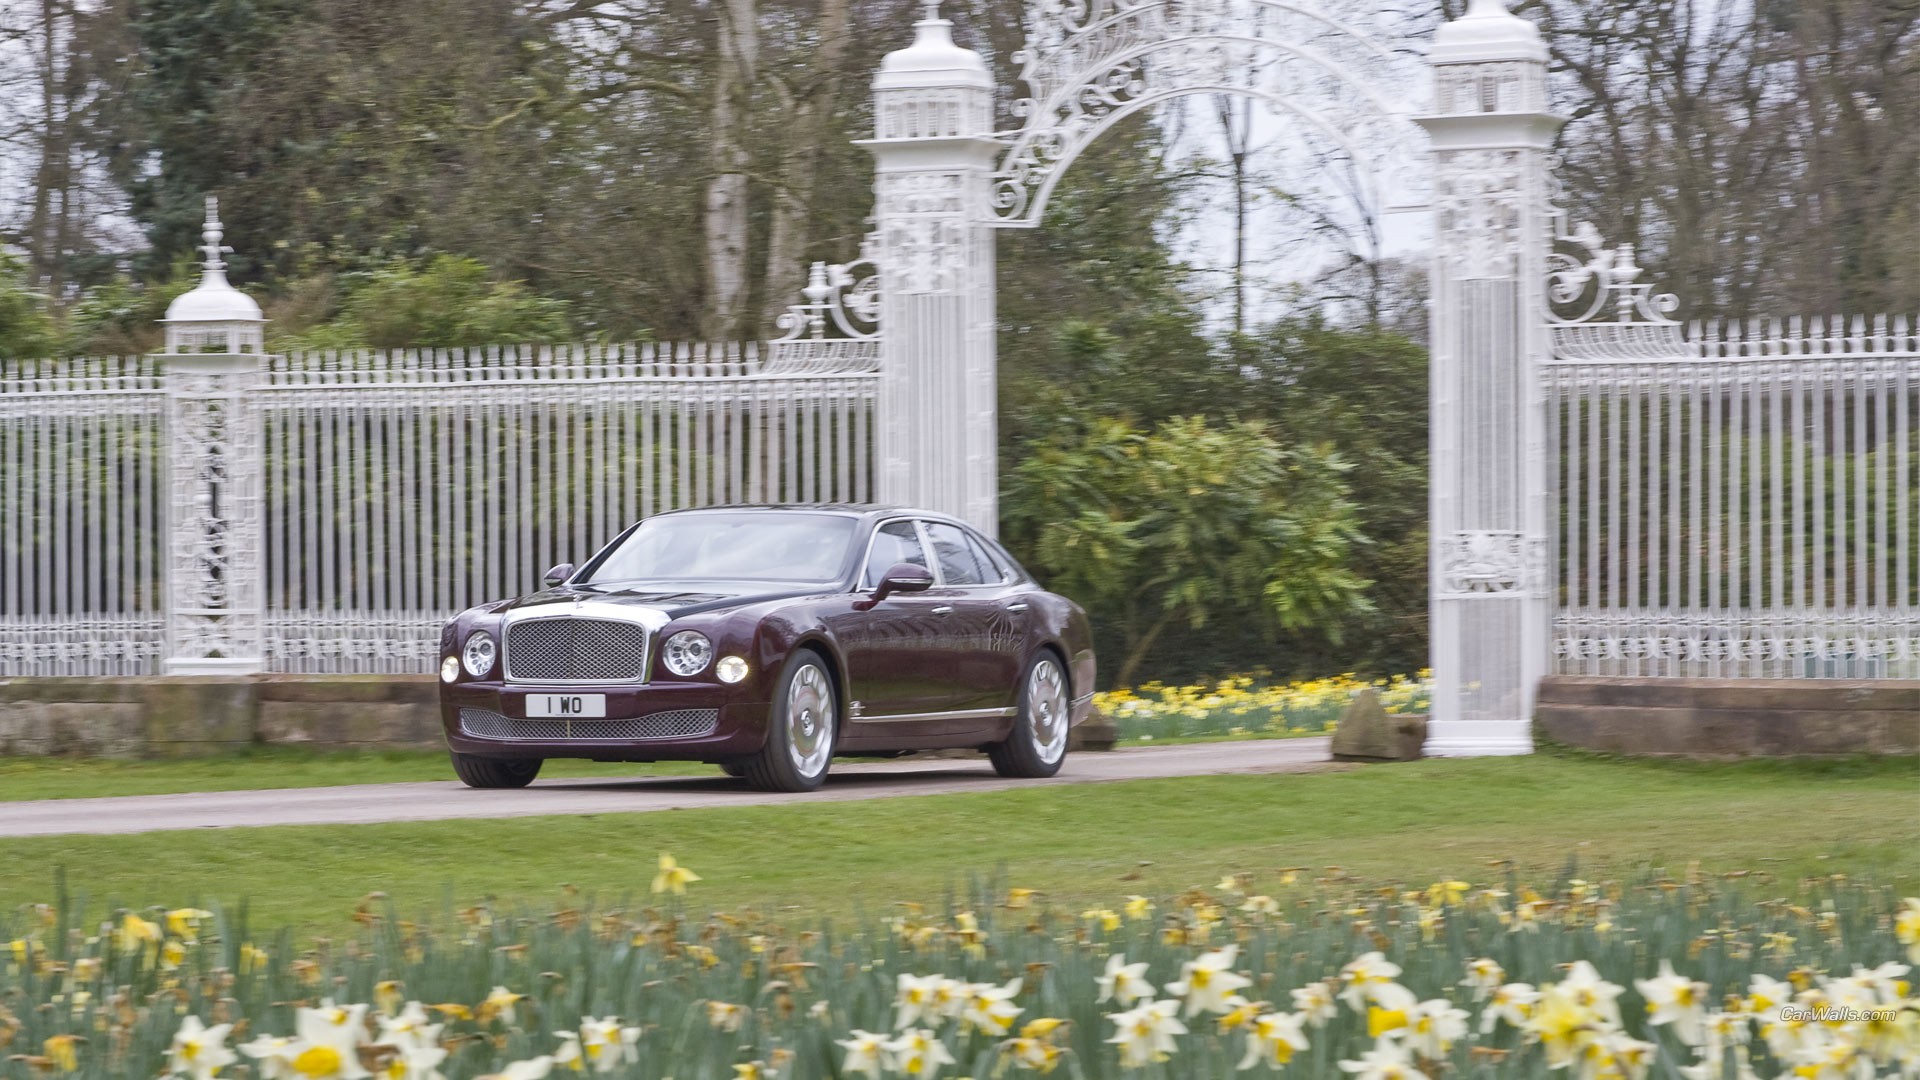 Bentley Mulsanne in the grounds of the mansion.